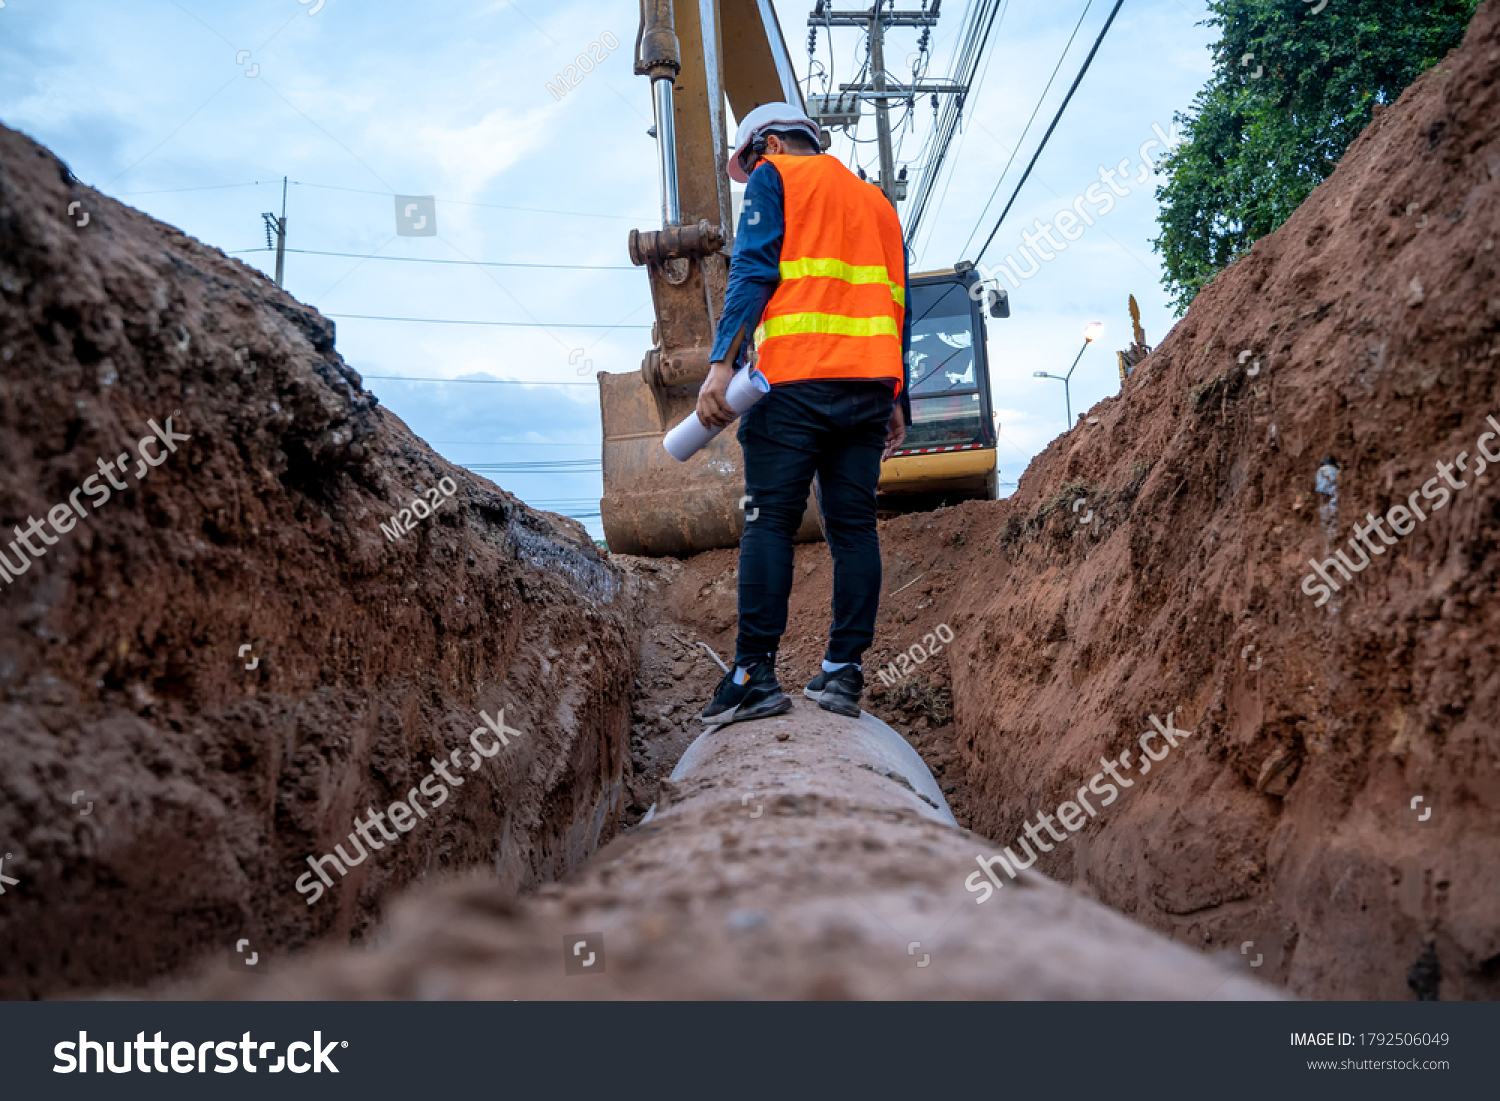 Engineer wear safety uniform examining excavation concrete Drainage Pipe and manhole water system underground at construction site. #1792506049